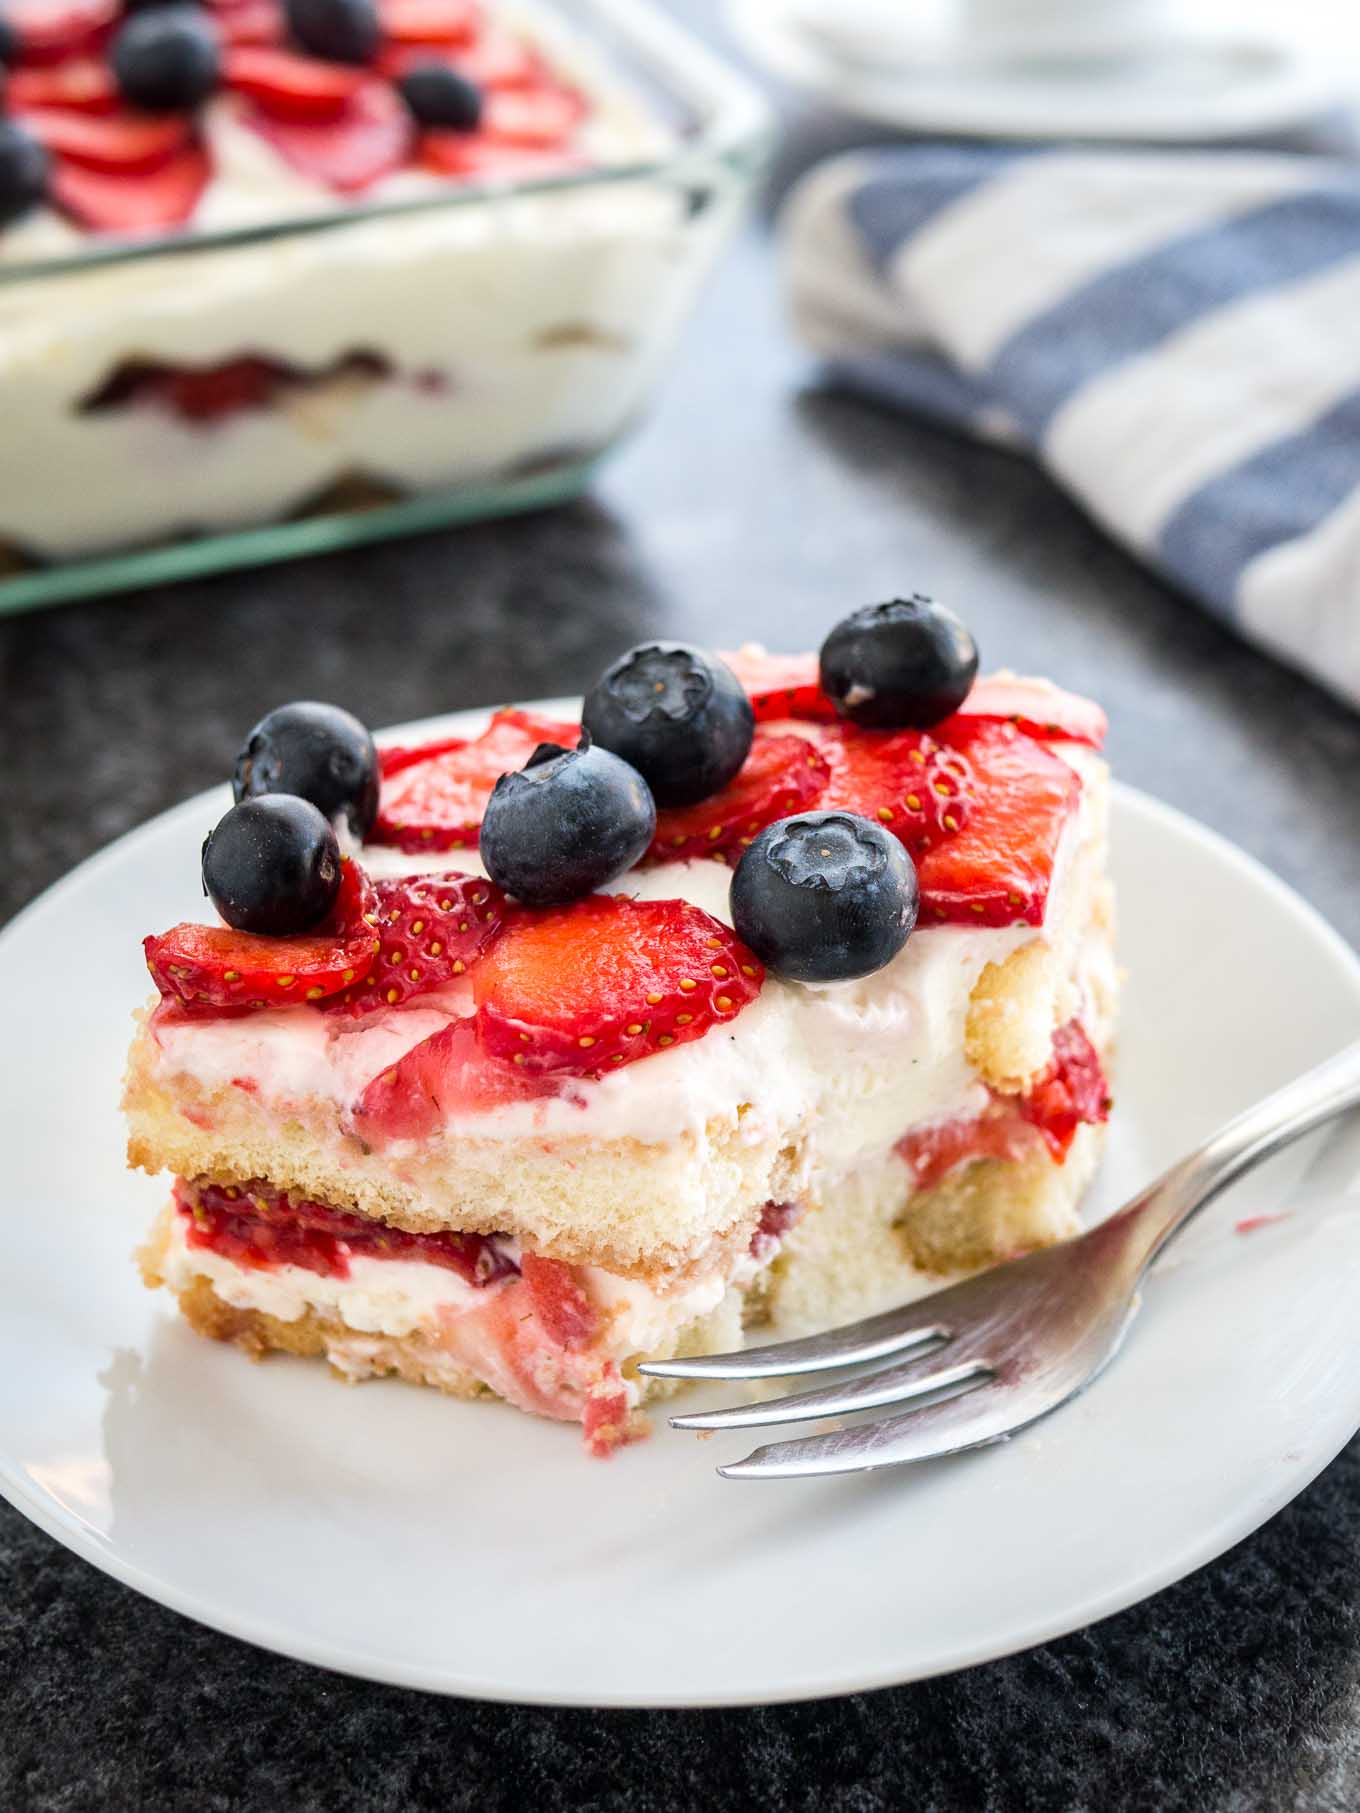 A white plate with a piece of strawberry tiramisu topped with blueberries. The rest of the tiramisu is in a glass baking dish in the background next to a white and blue dishtowel. A piece of the tiramisu has been removed and a fork is lying in front of it.